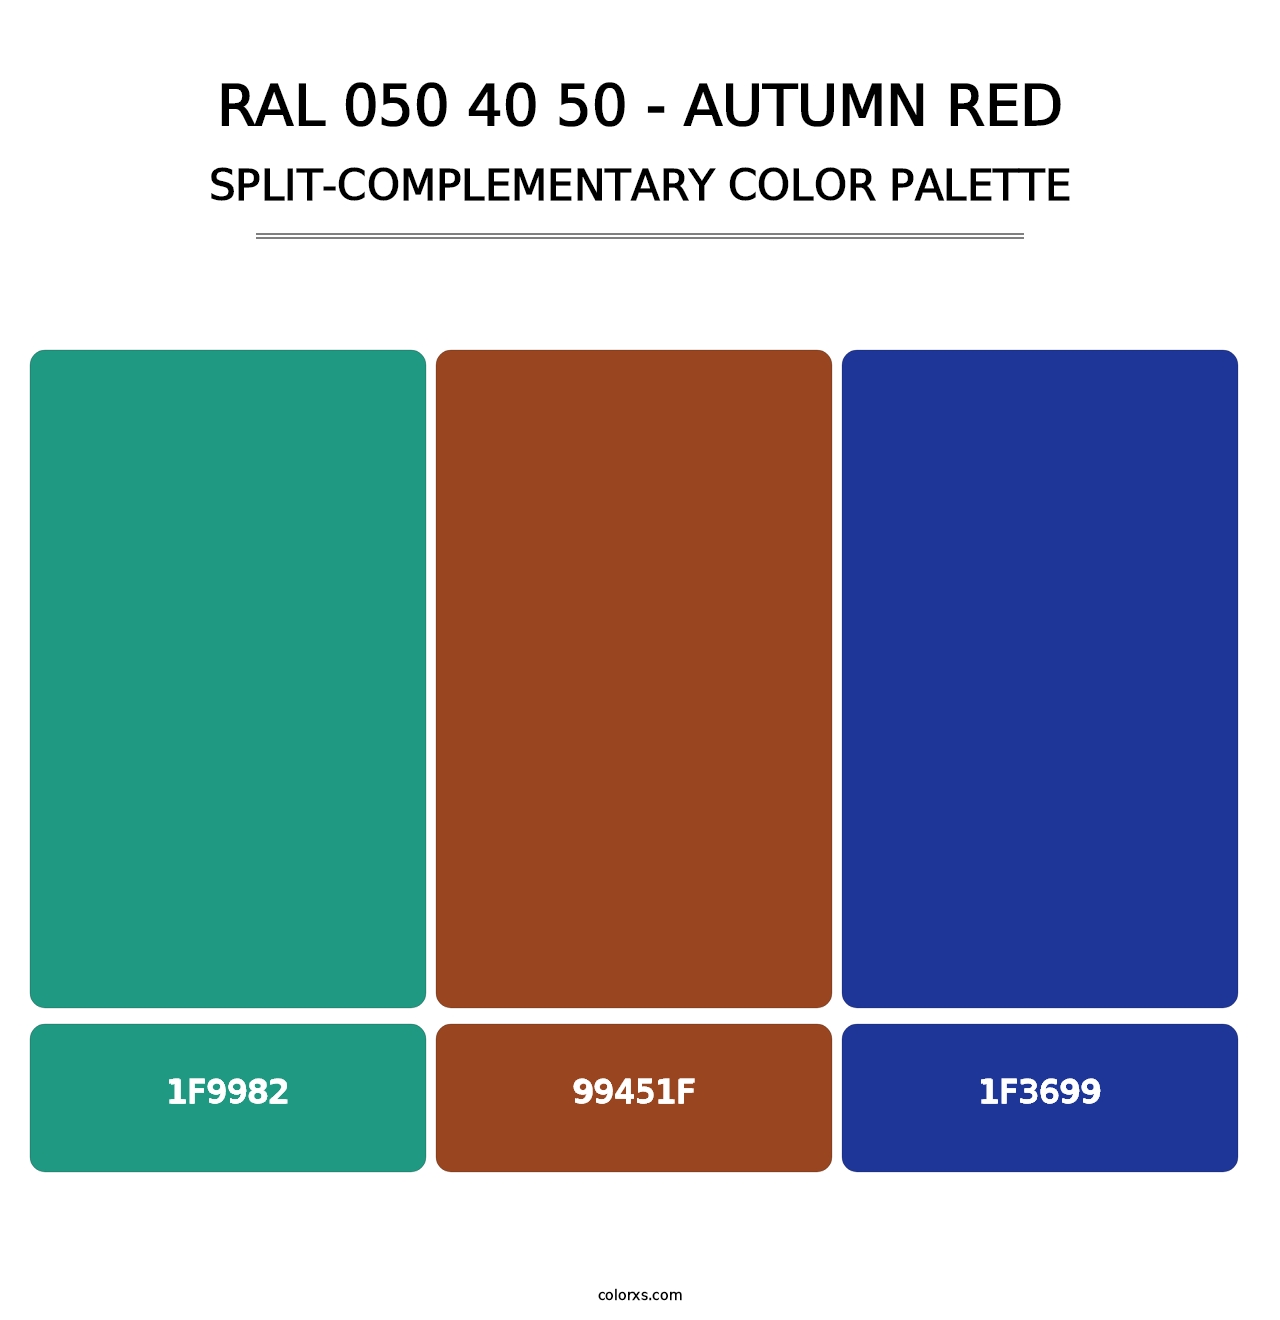 RAL 050 40 50 - Autumn Red - Split-Complementary Color Palette